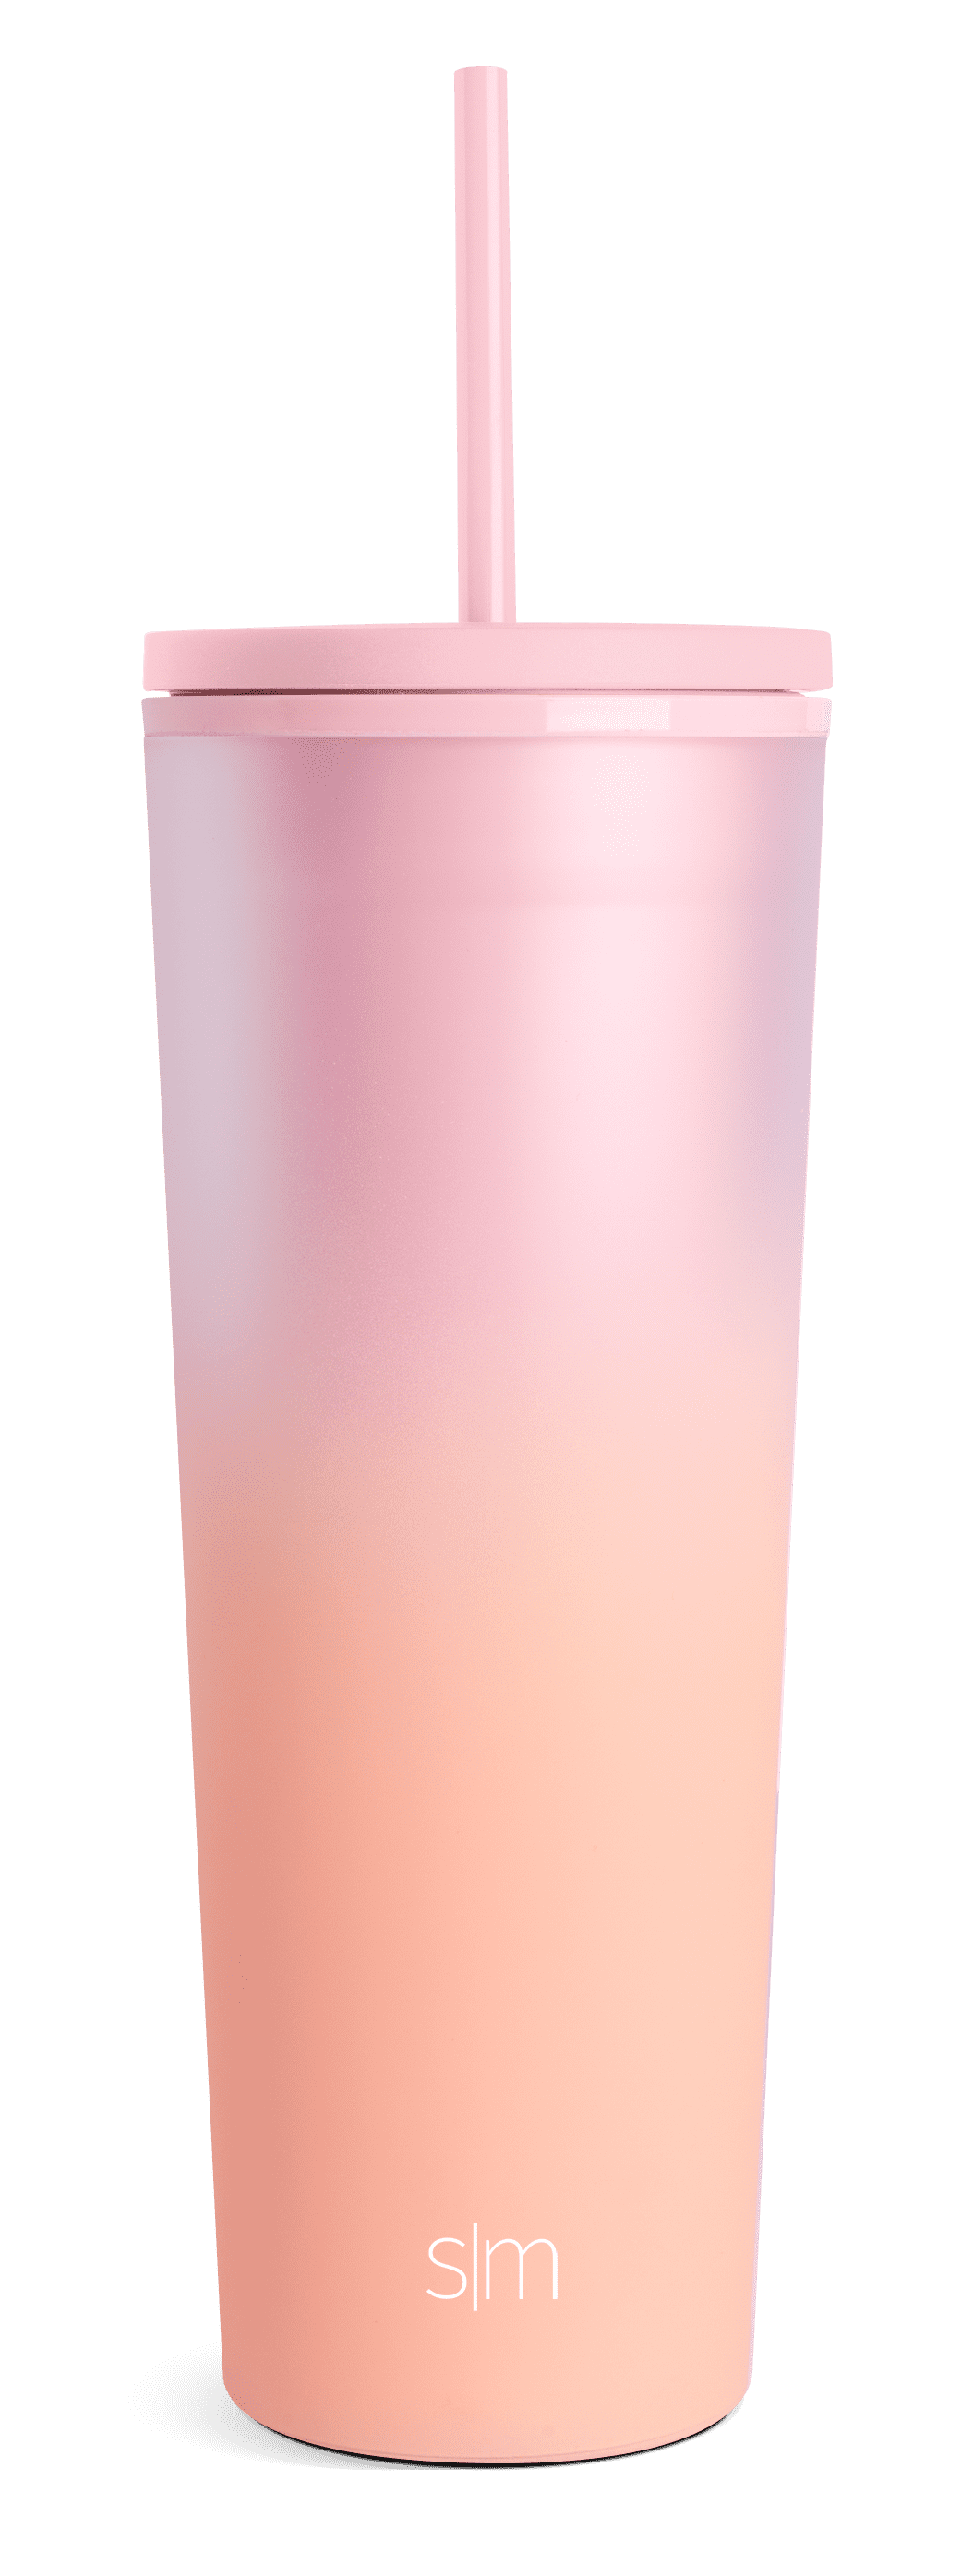 simplemodern unboxing!💞✨ this is clearly a PINK STAN account!! I'm i, 40 oz tumbler cups